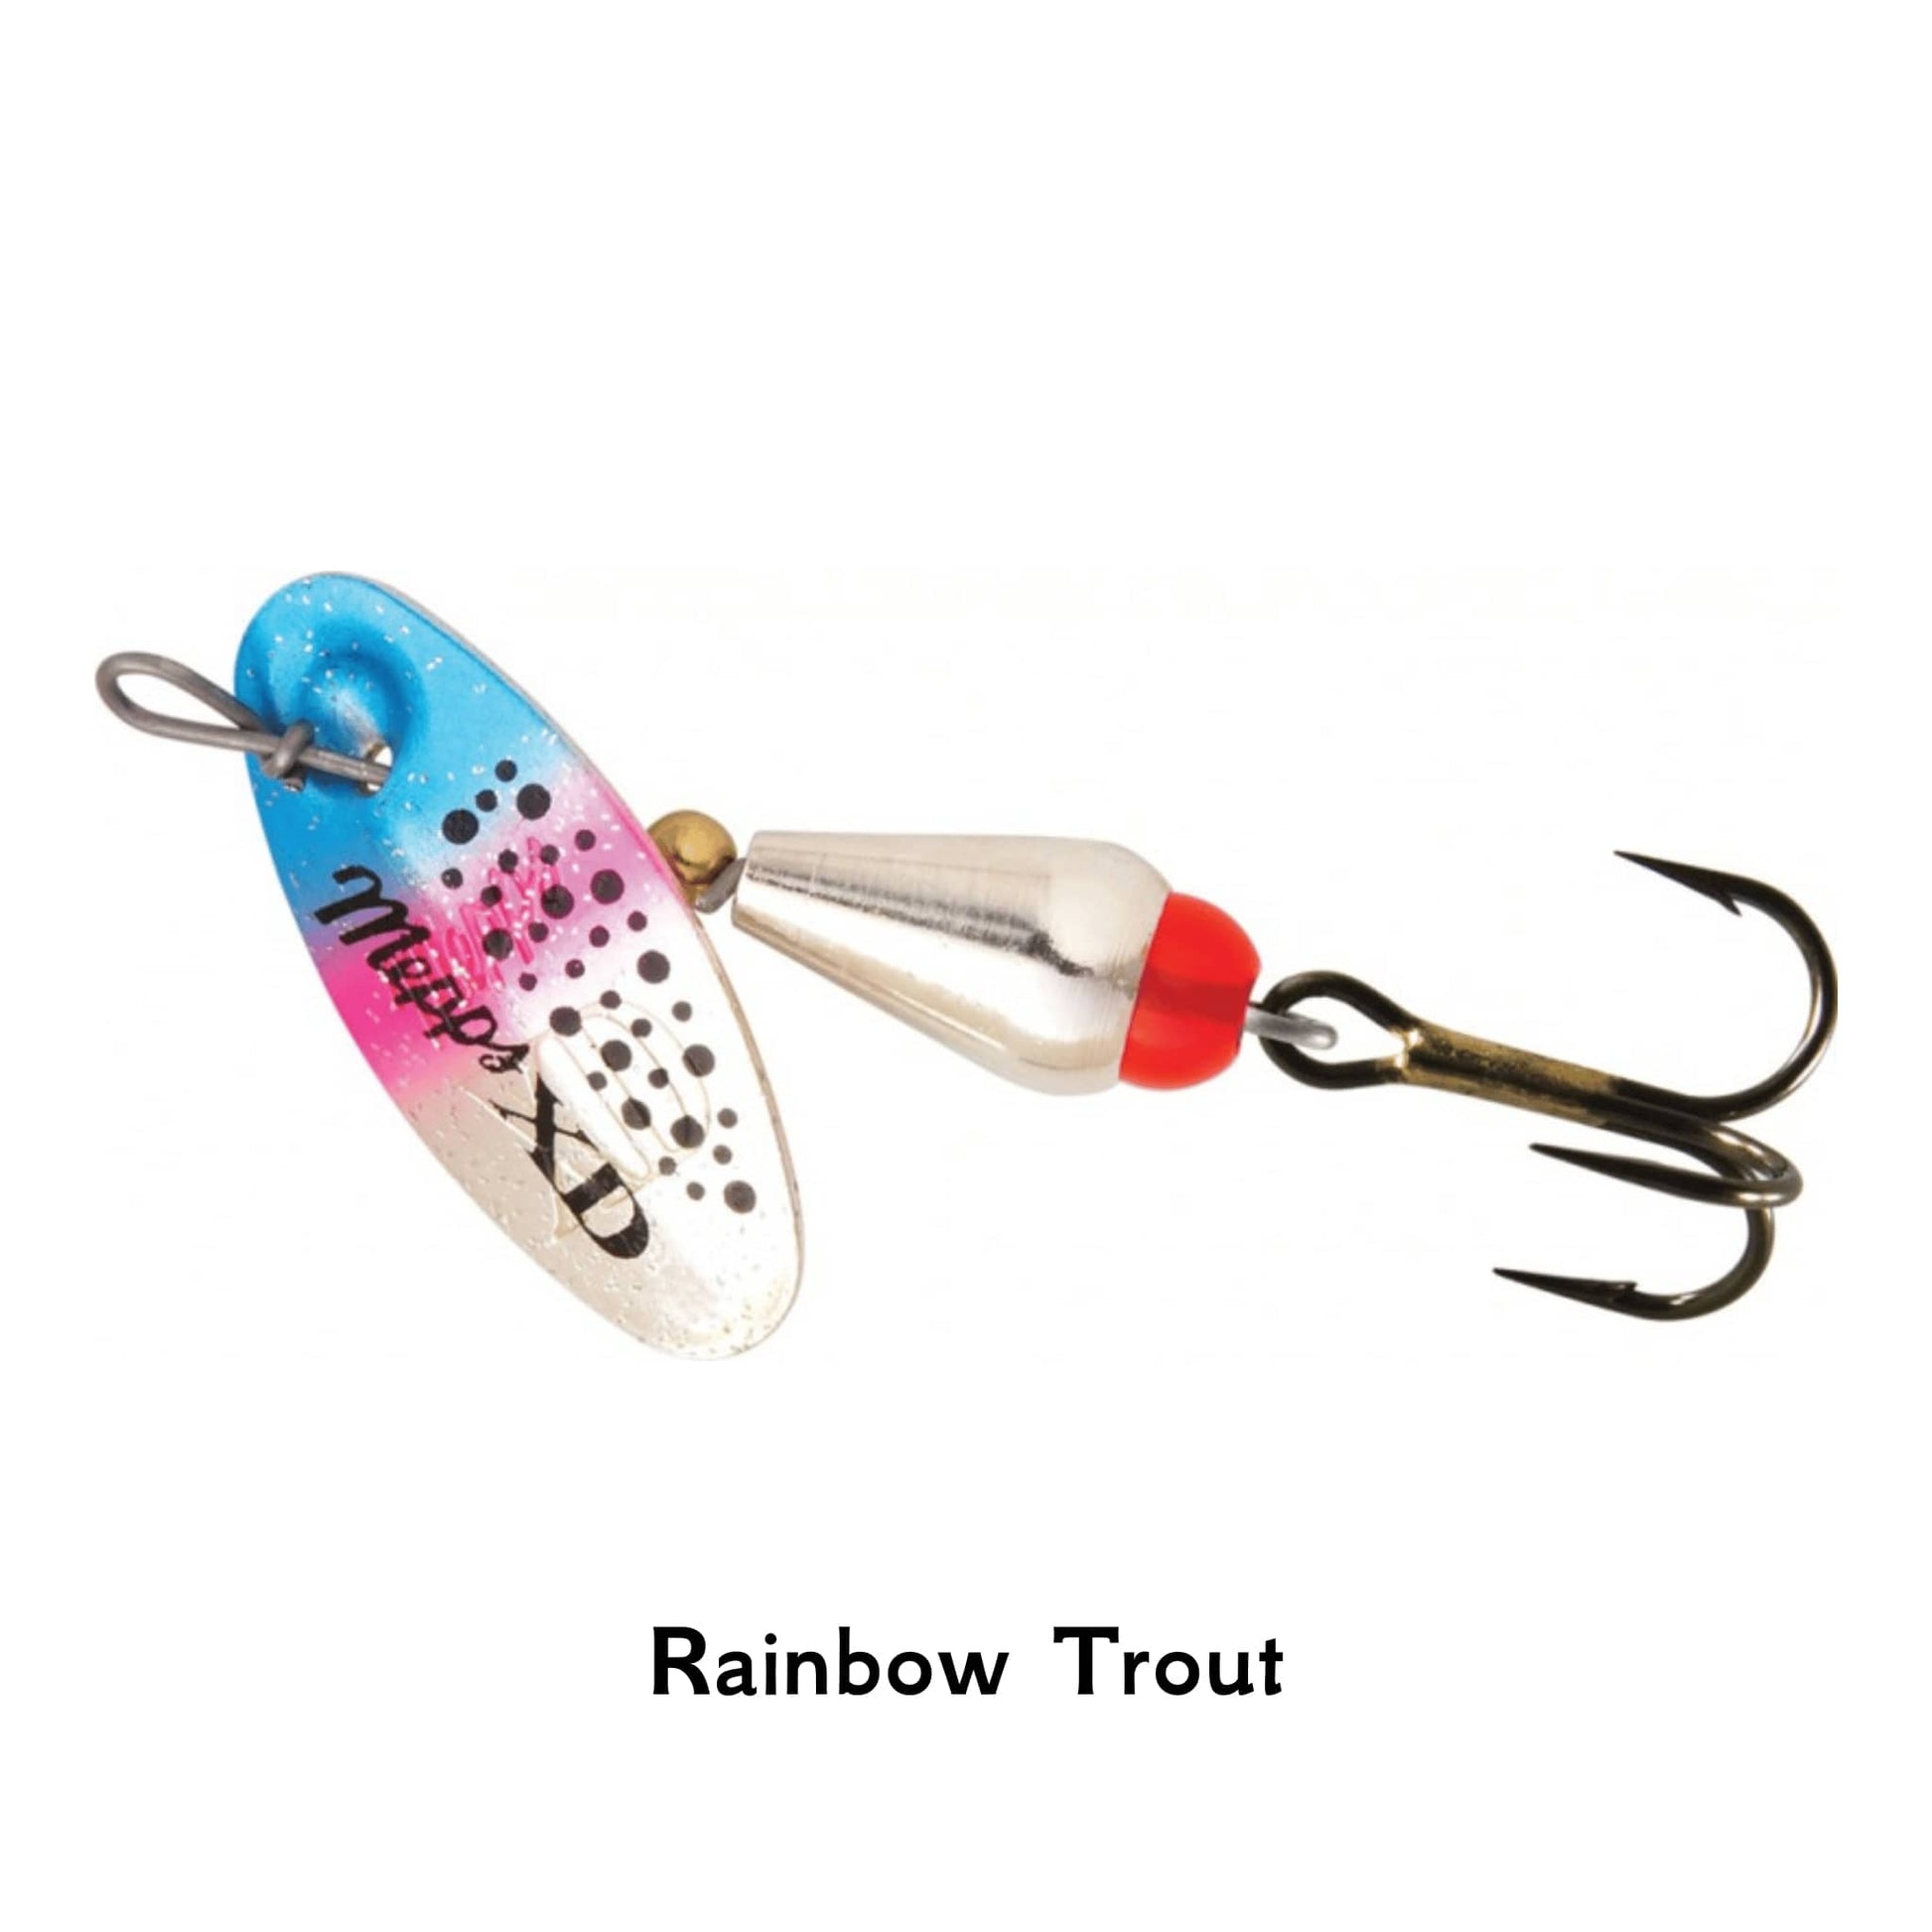 Mepps XD Xtra Deep Rainbow Trout Spoon Fishing Lure All Colours Size 2 3 Pike Perch Zander Spinner Vertical Jig